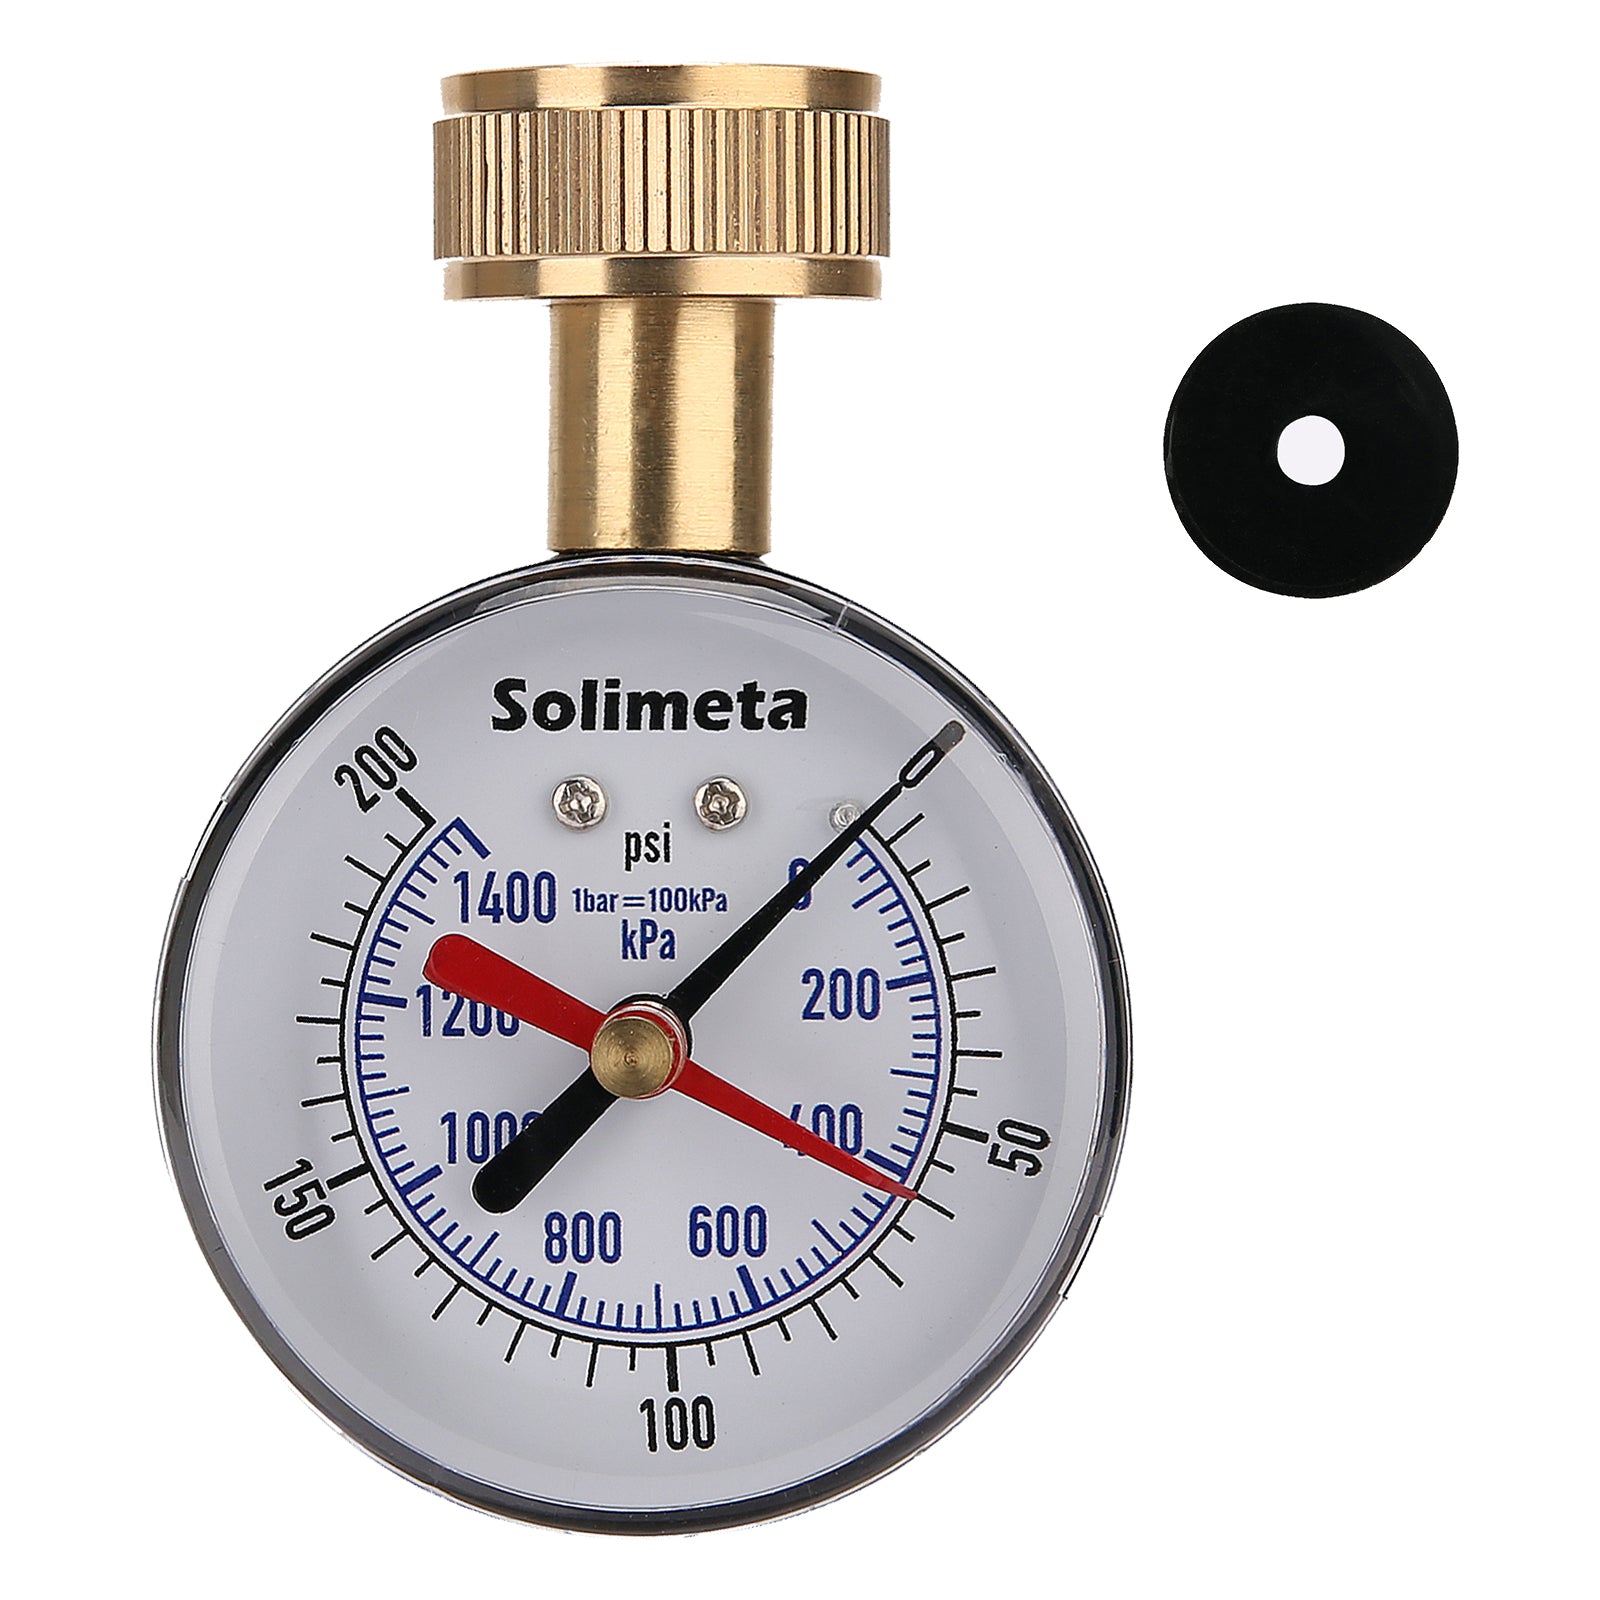 Water Pressure Test Gauge 3/4" Female Hose Faucet 0-200 PSI Free Shipping NEW 